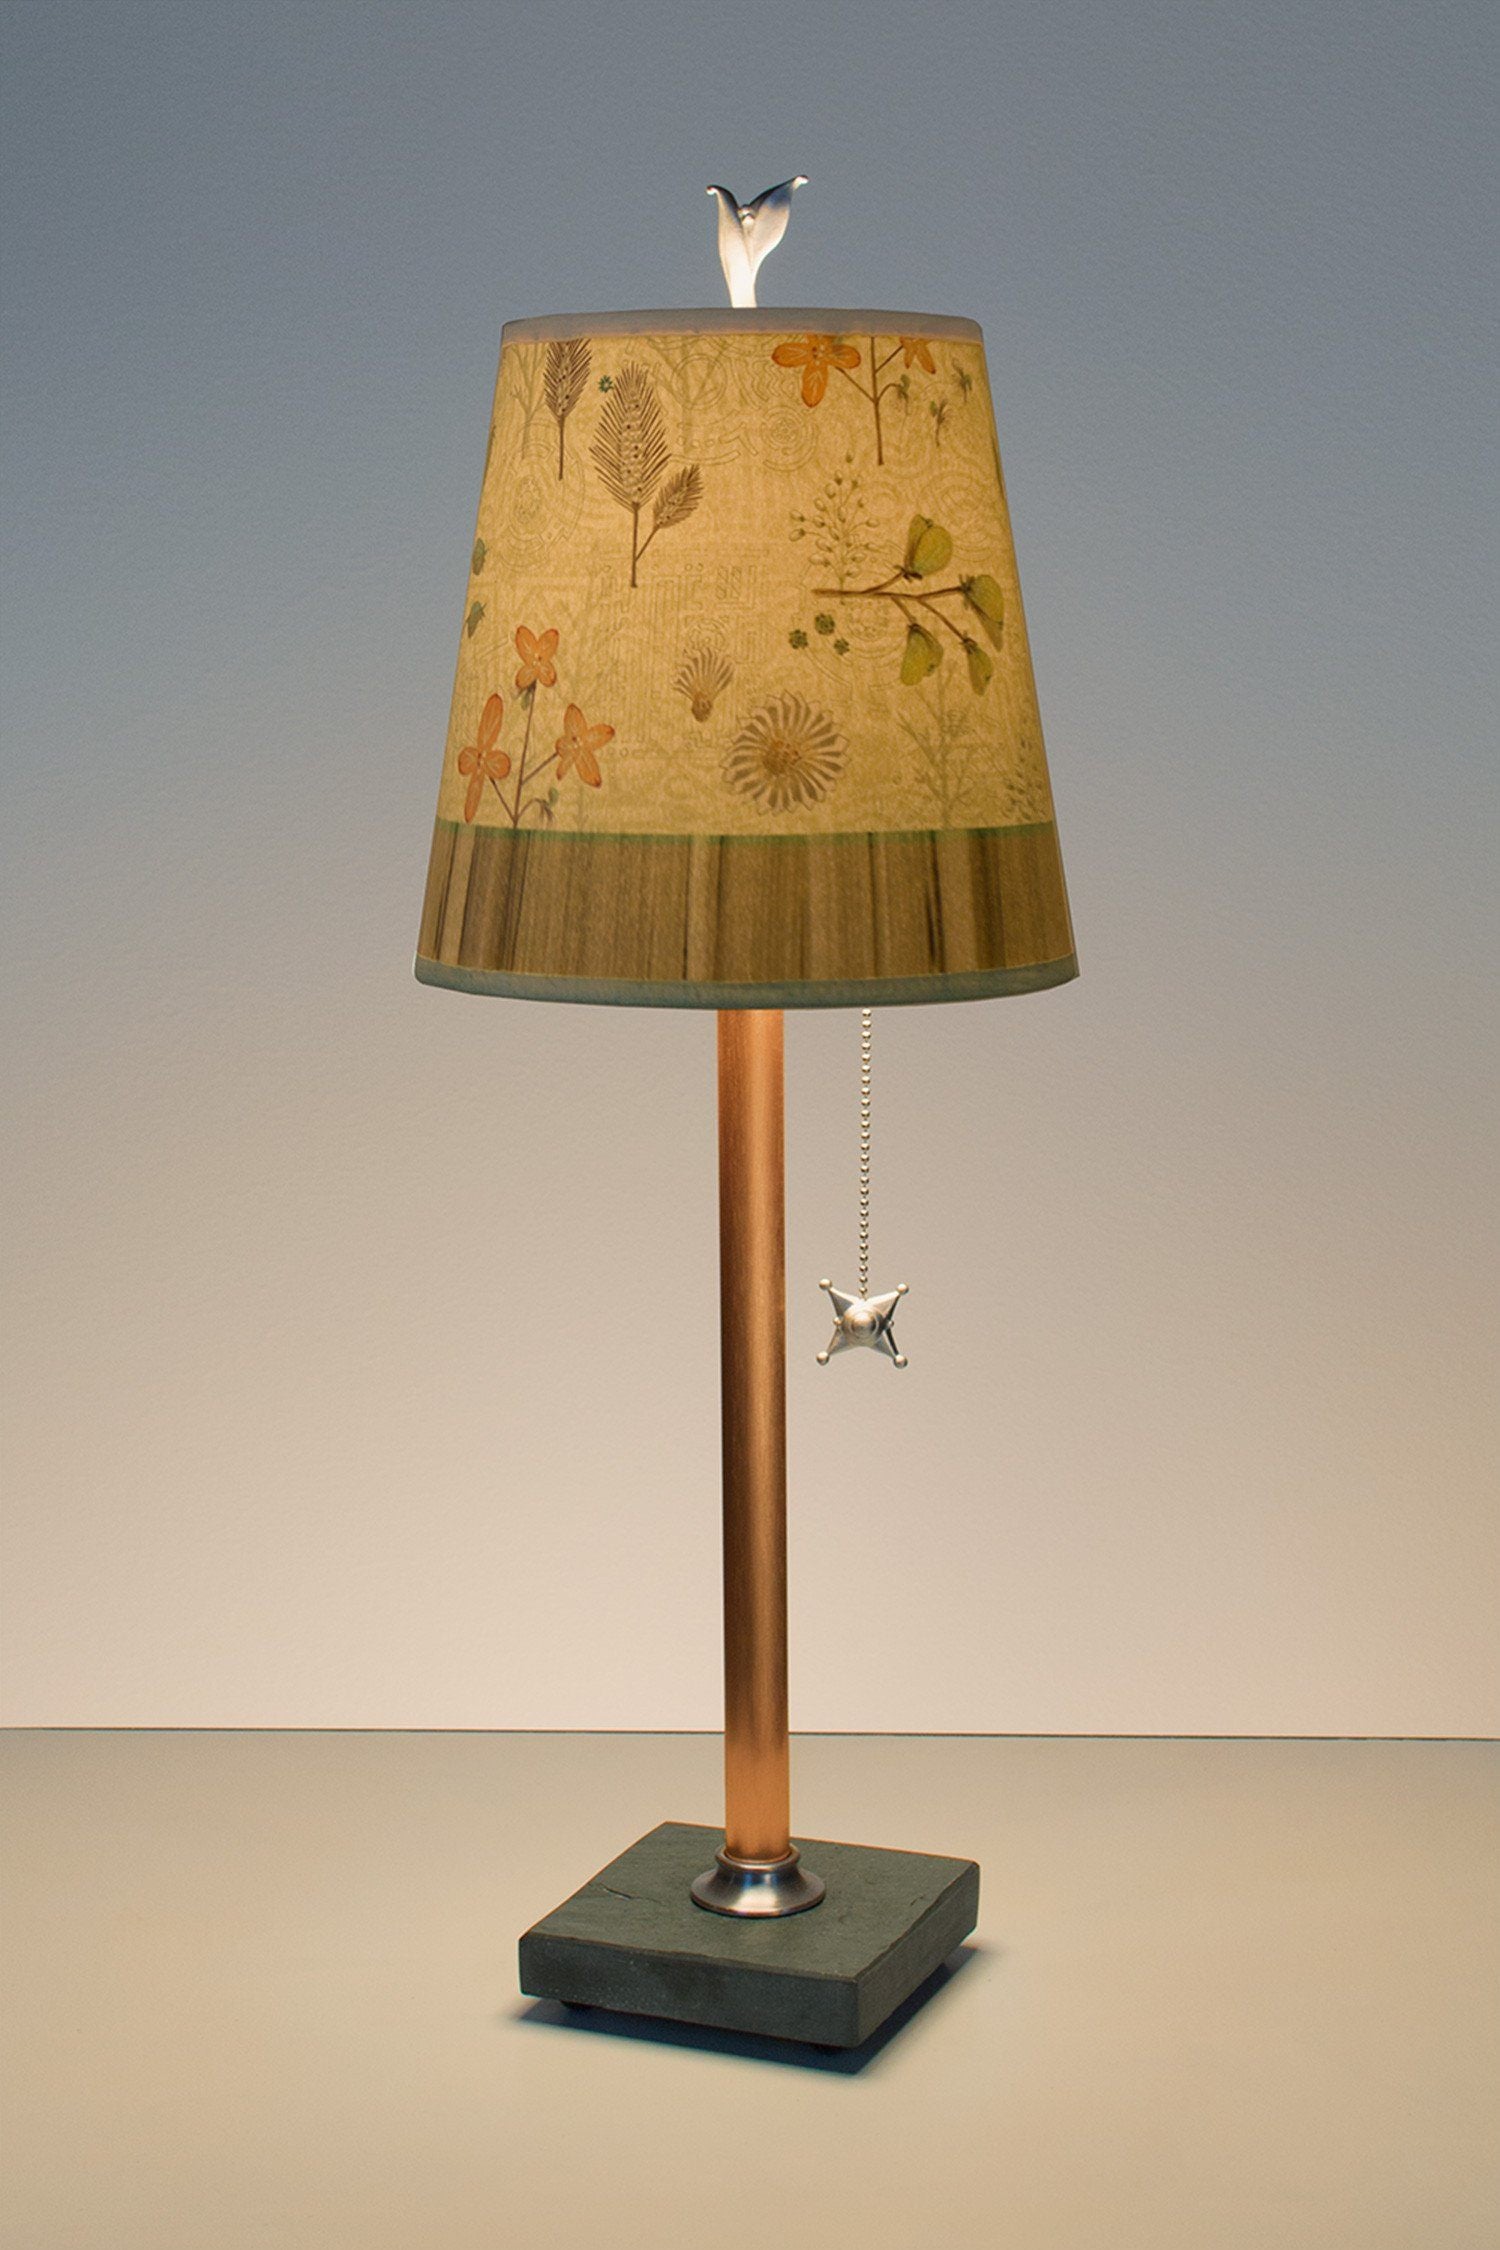 Janna Ugone & Co Table Lamps Copper Table Lamp with Small Drum Shade in Flora & Maze